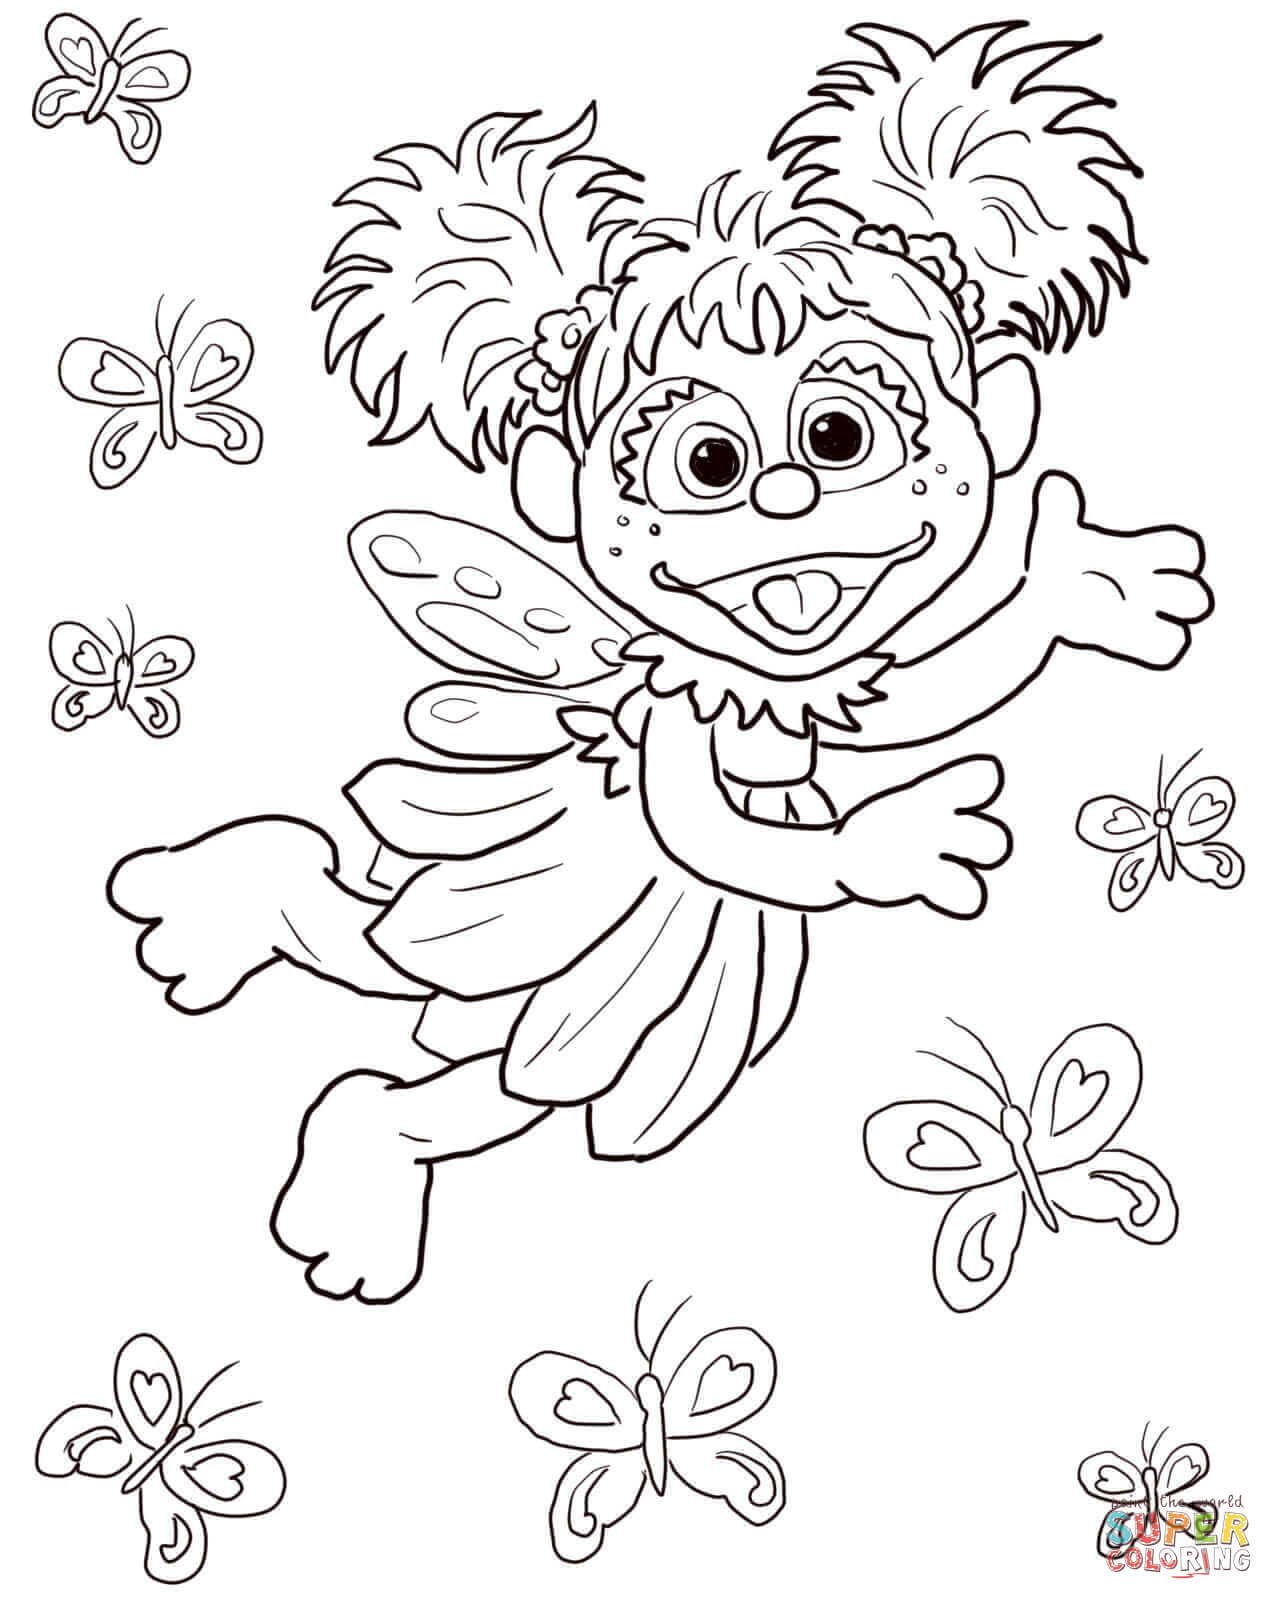 Sesame Street Coloring Books
 Abby Cadabby Flying with Butterflies coloring page